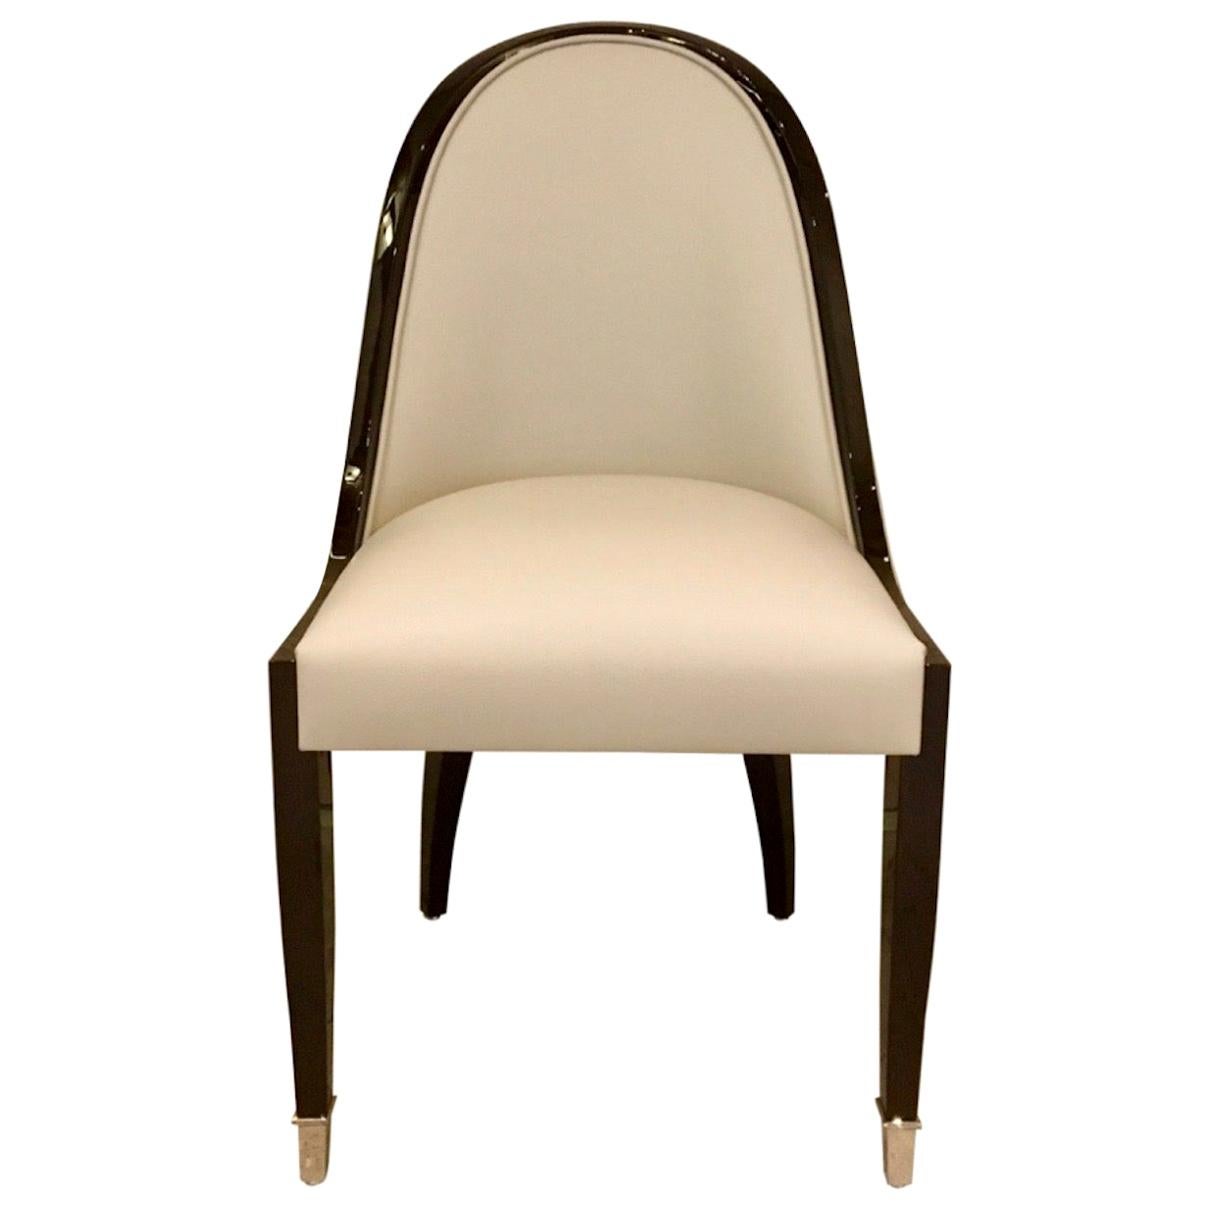 Chair with Narrow Curved Backrest in Art Deco Style with Leather and Wood